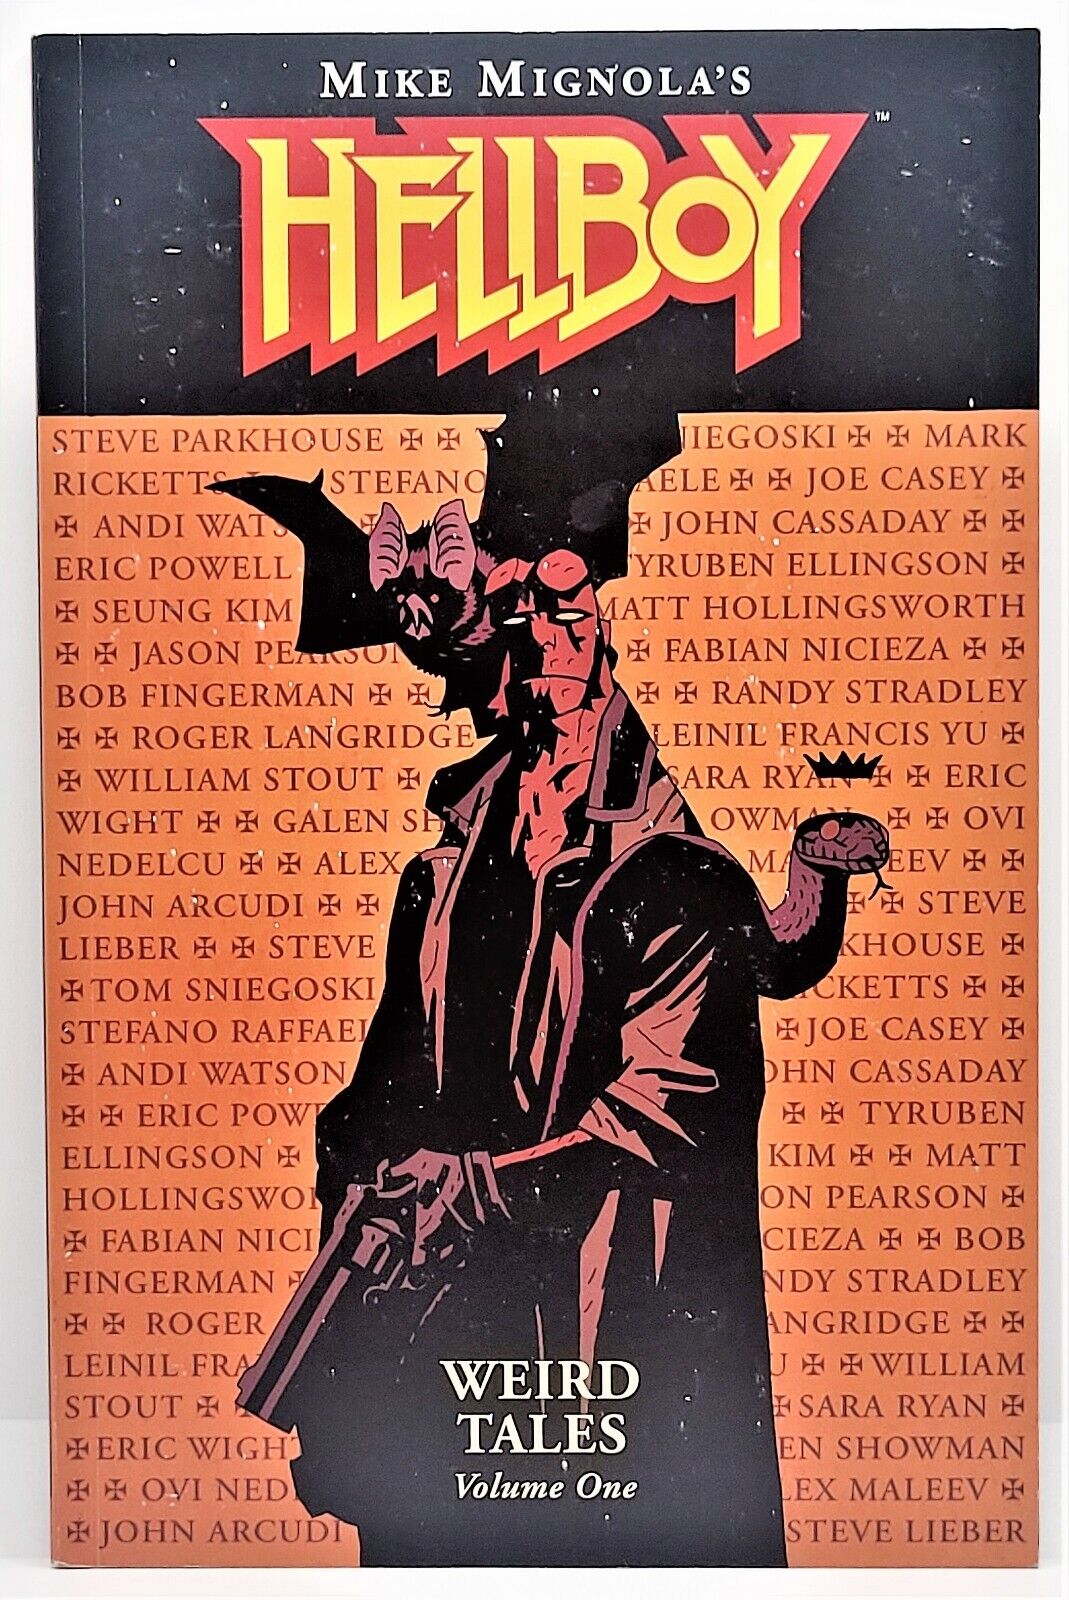 Hellboy: Weird Tales Volume 1 Dark Horse Comics *Signed by Mike Mignola- CO3